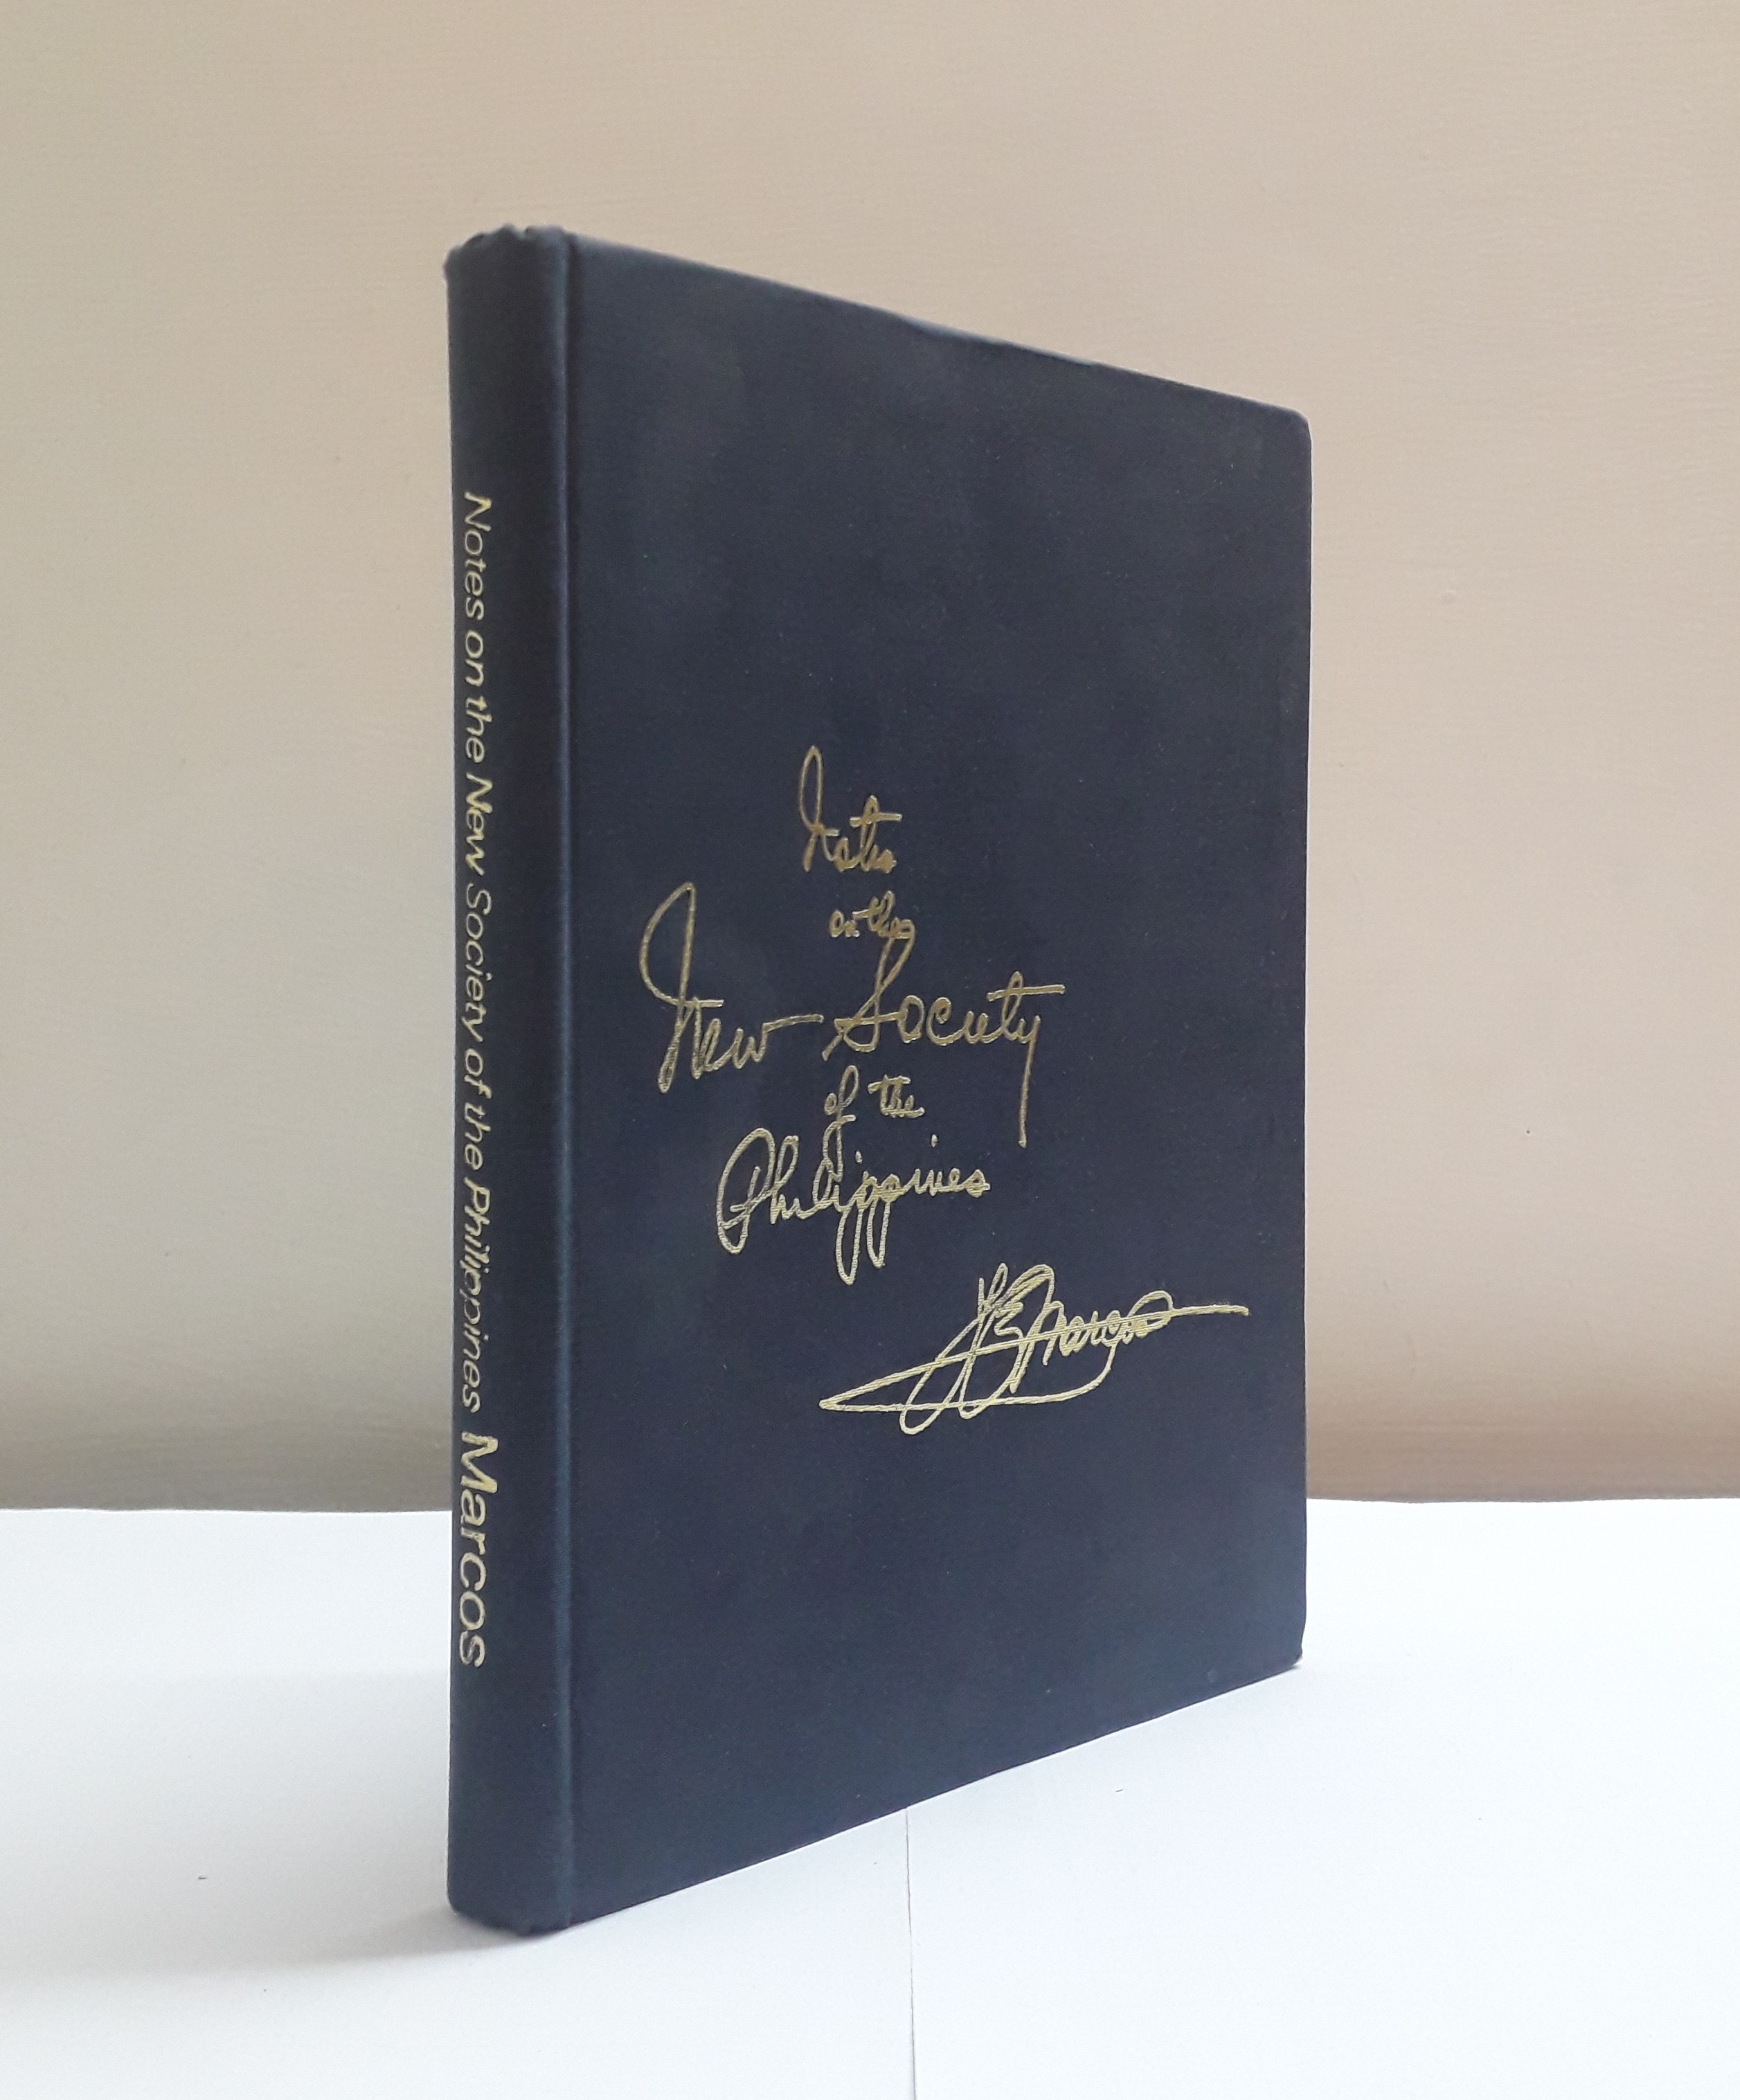 notes on the new society of the philippines (signed edition)